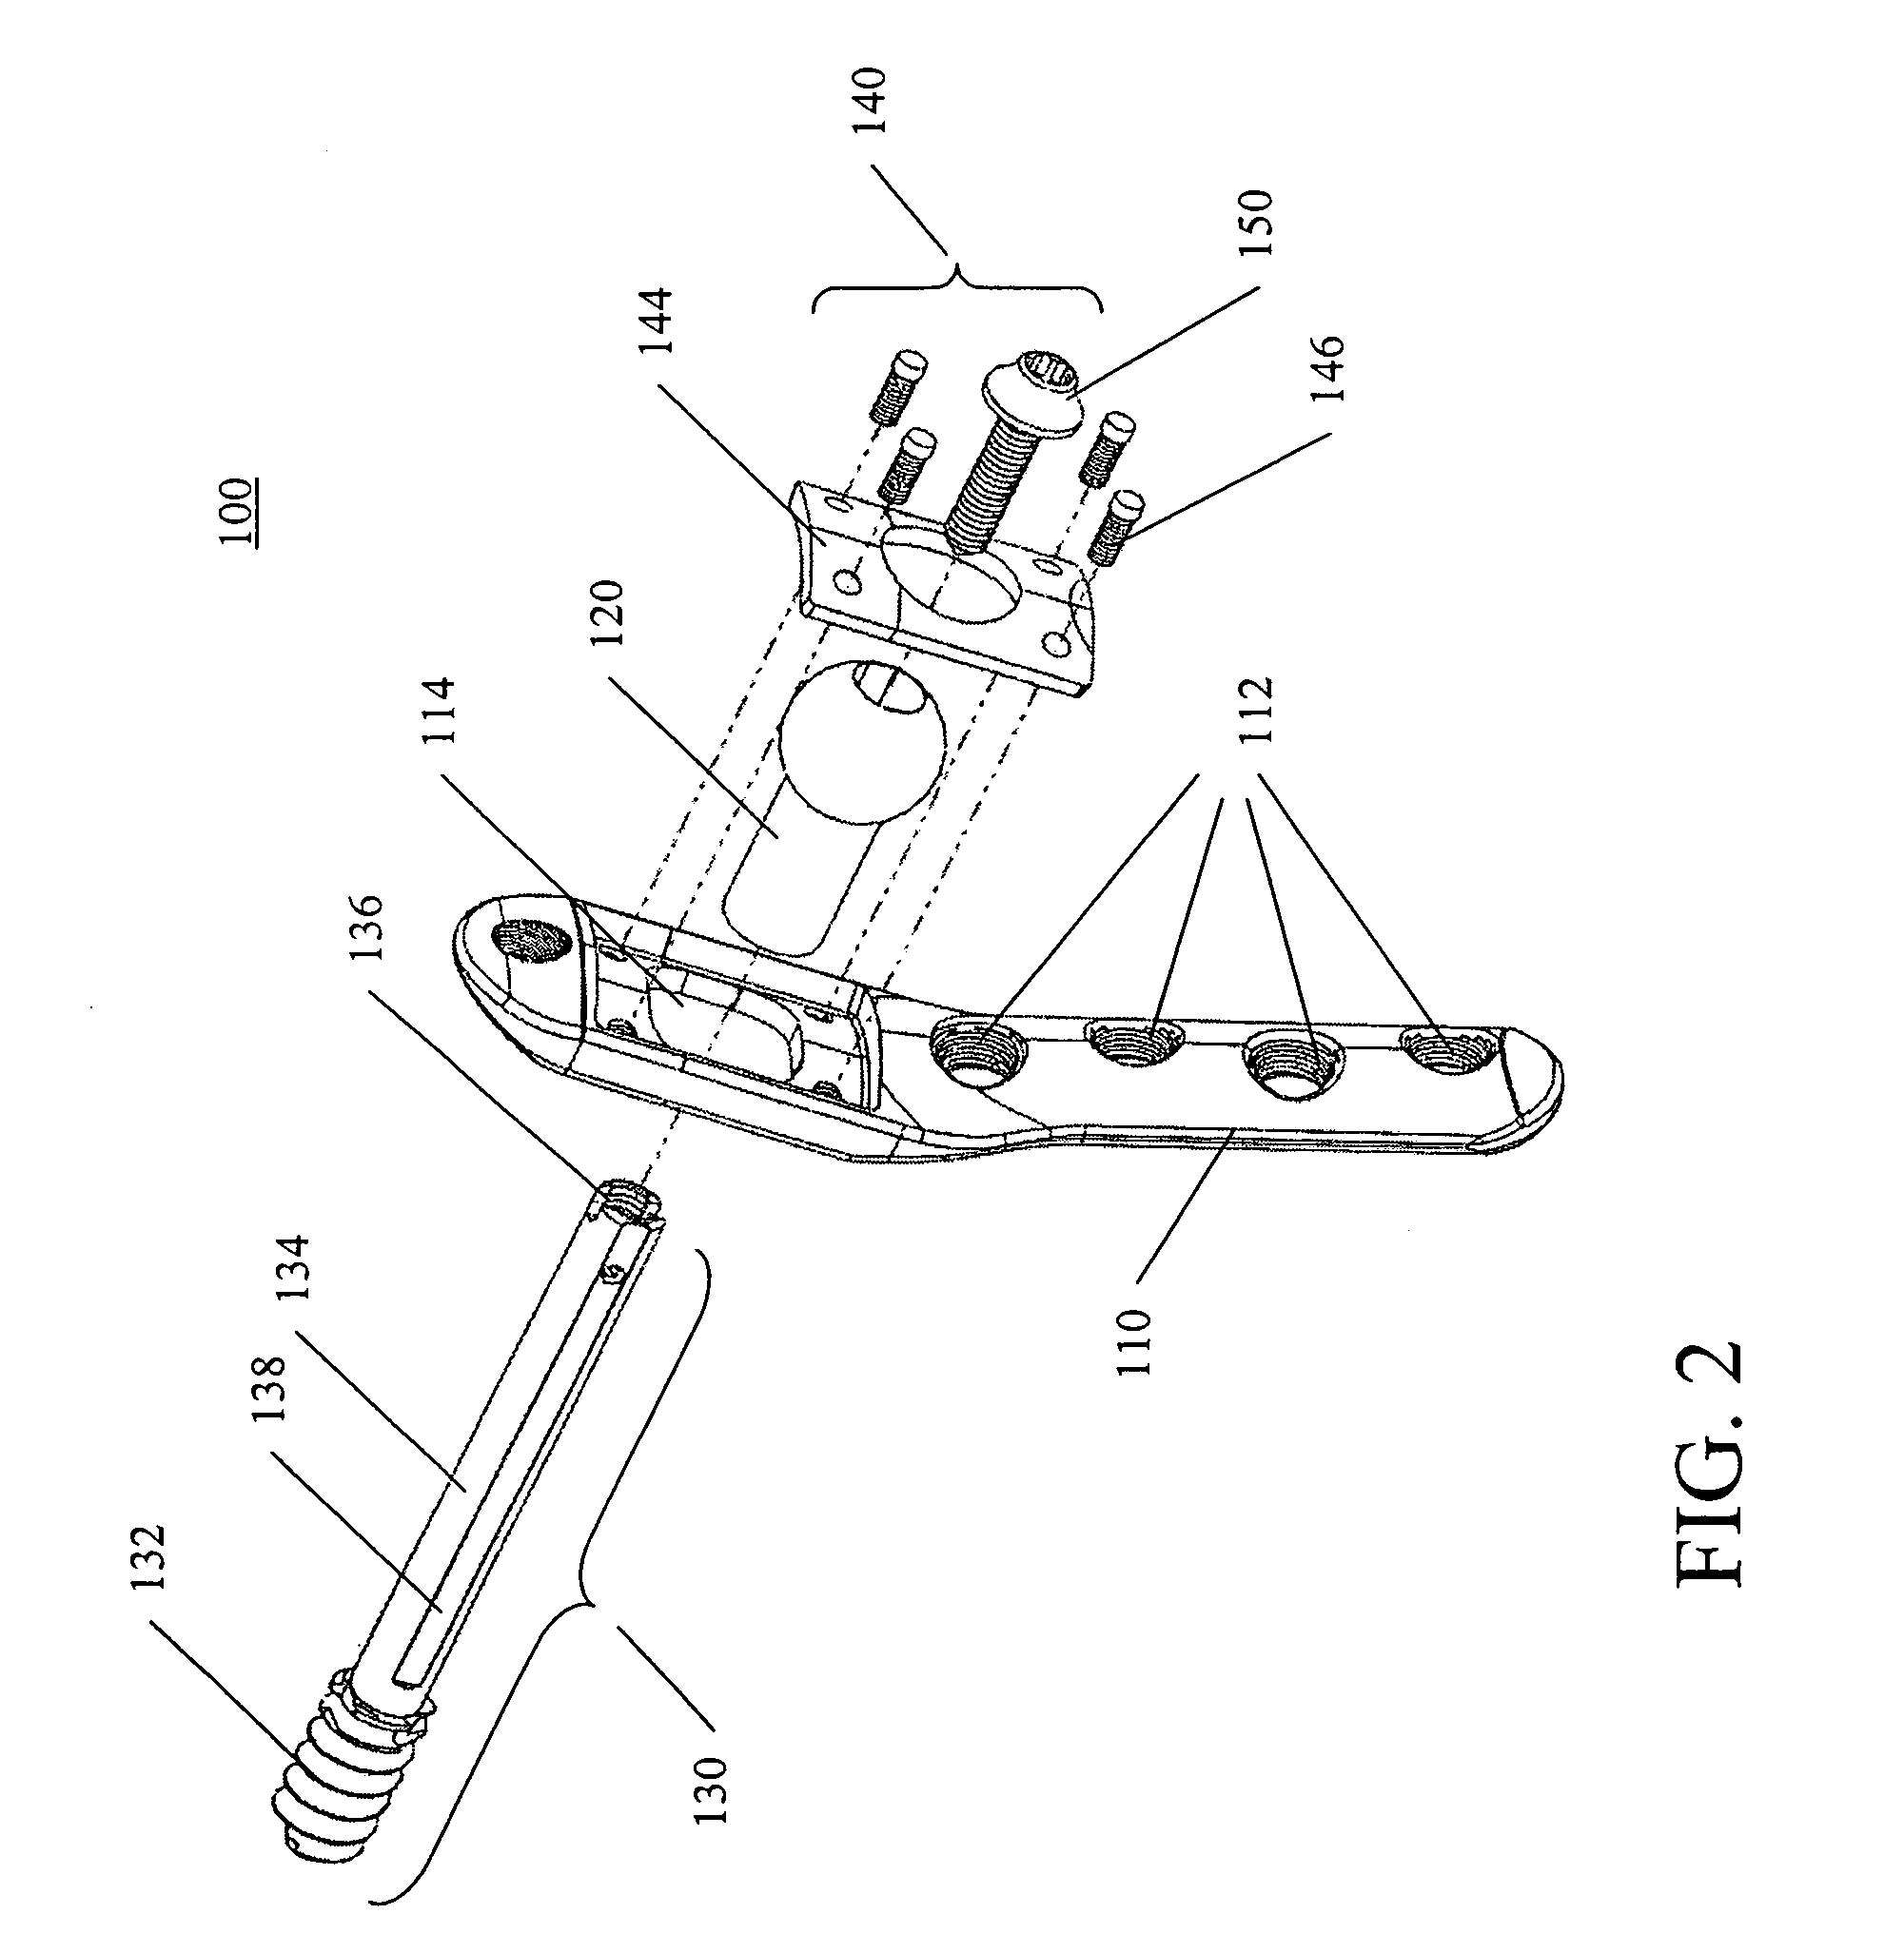 Methods for treating fractures of the femur and femoral fracture devices